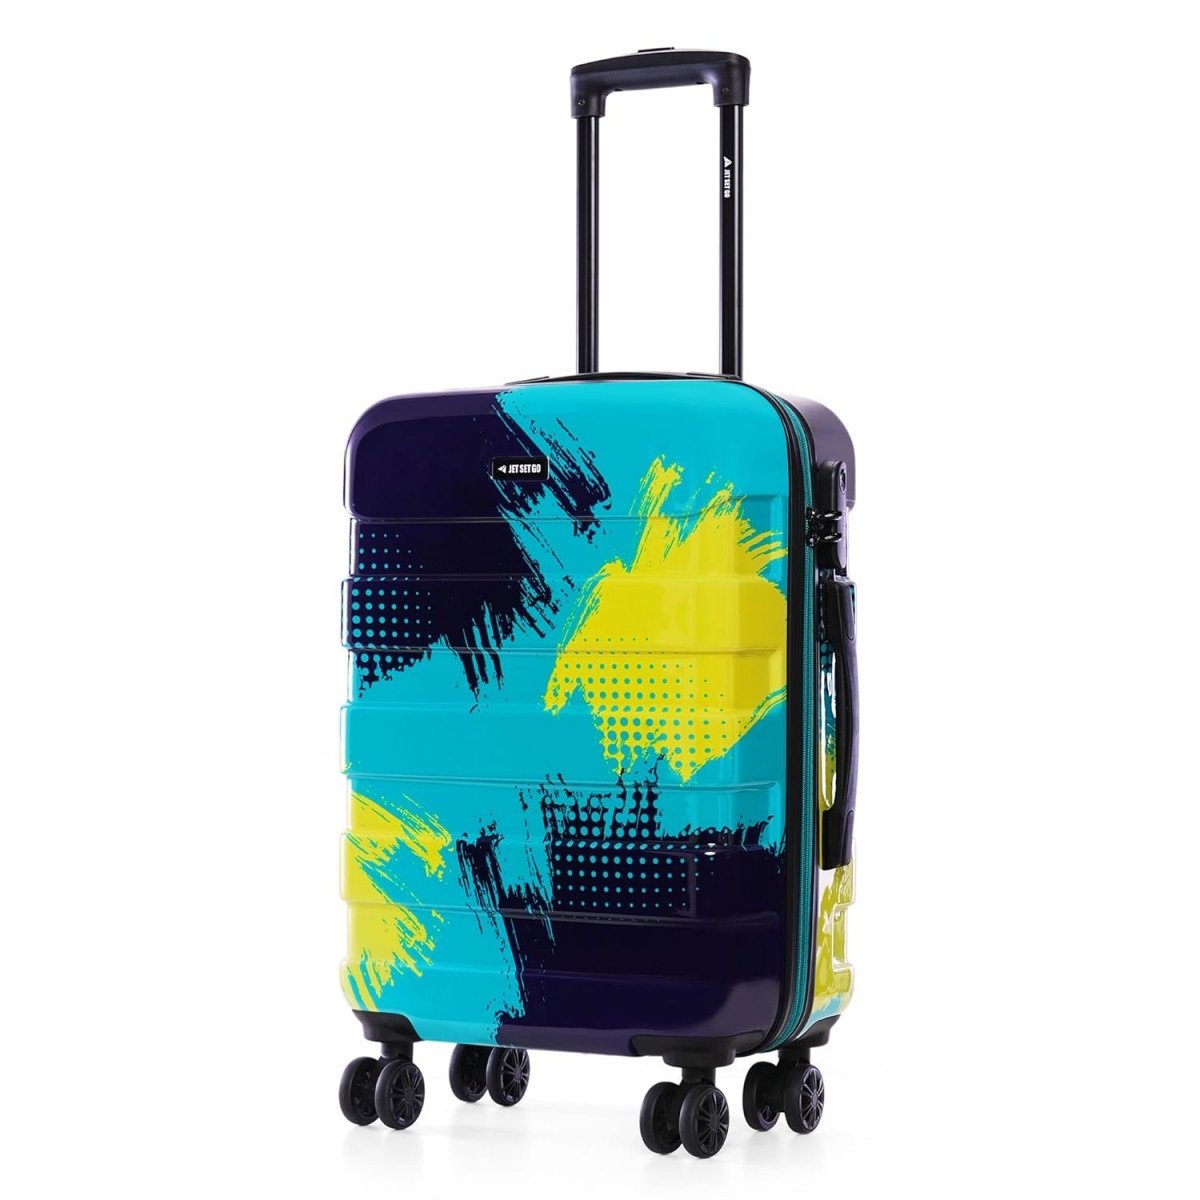 Nasher Miles Limited Edition Jet Set Go Real Hard-Sided Polycarbonate Printed Check-in Luggage Teal Indigo 24 inch 65cm Trolley Bag Suitcase